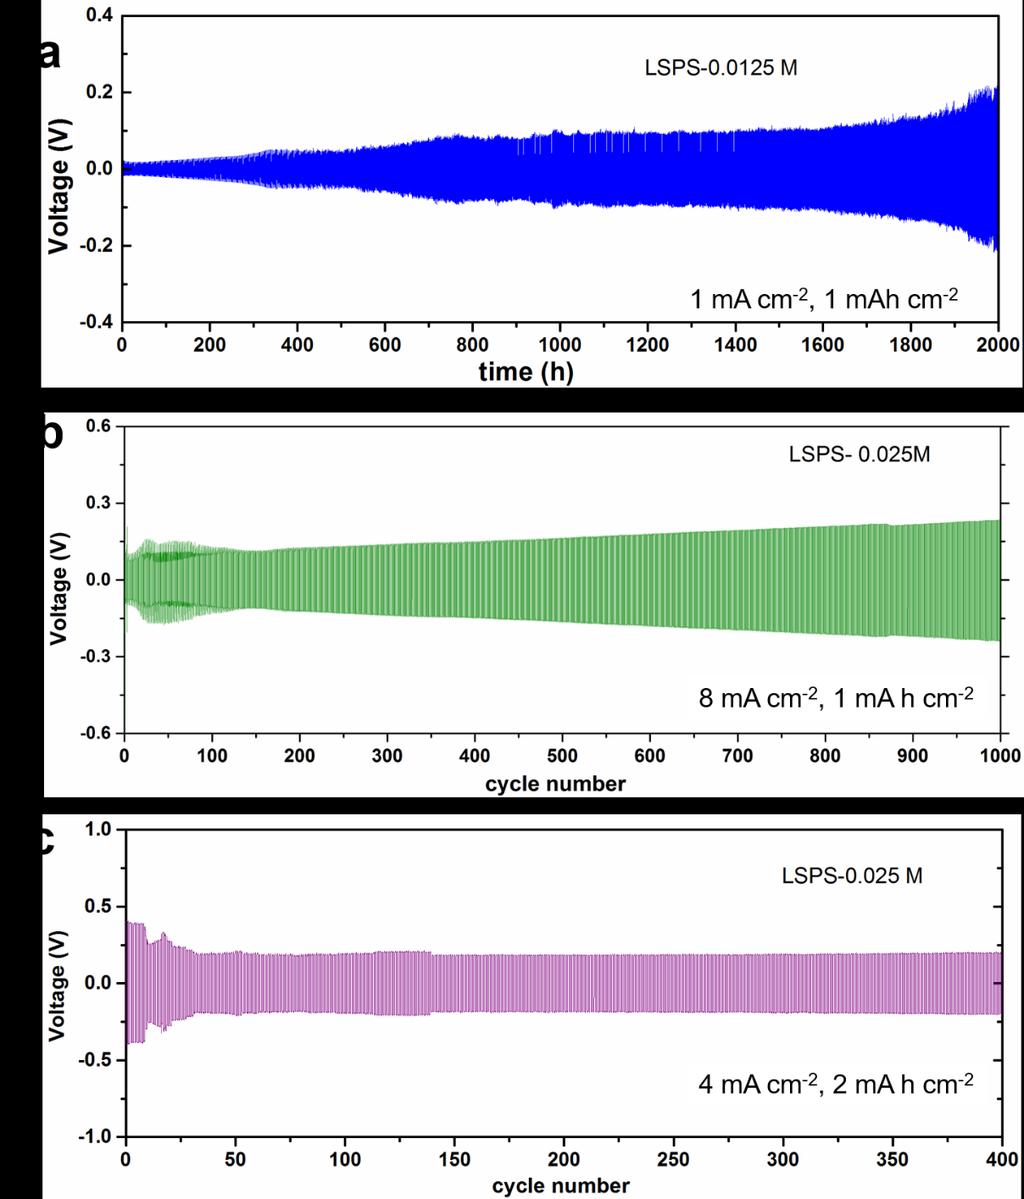 Figure S13. The voltage evolution of Li Li symmetric cells using LSPS electrolytes at varied current and capacity, related to Figure 5.